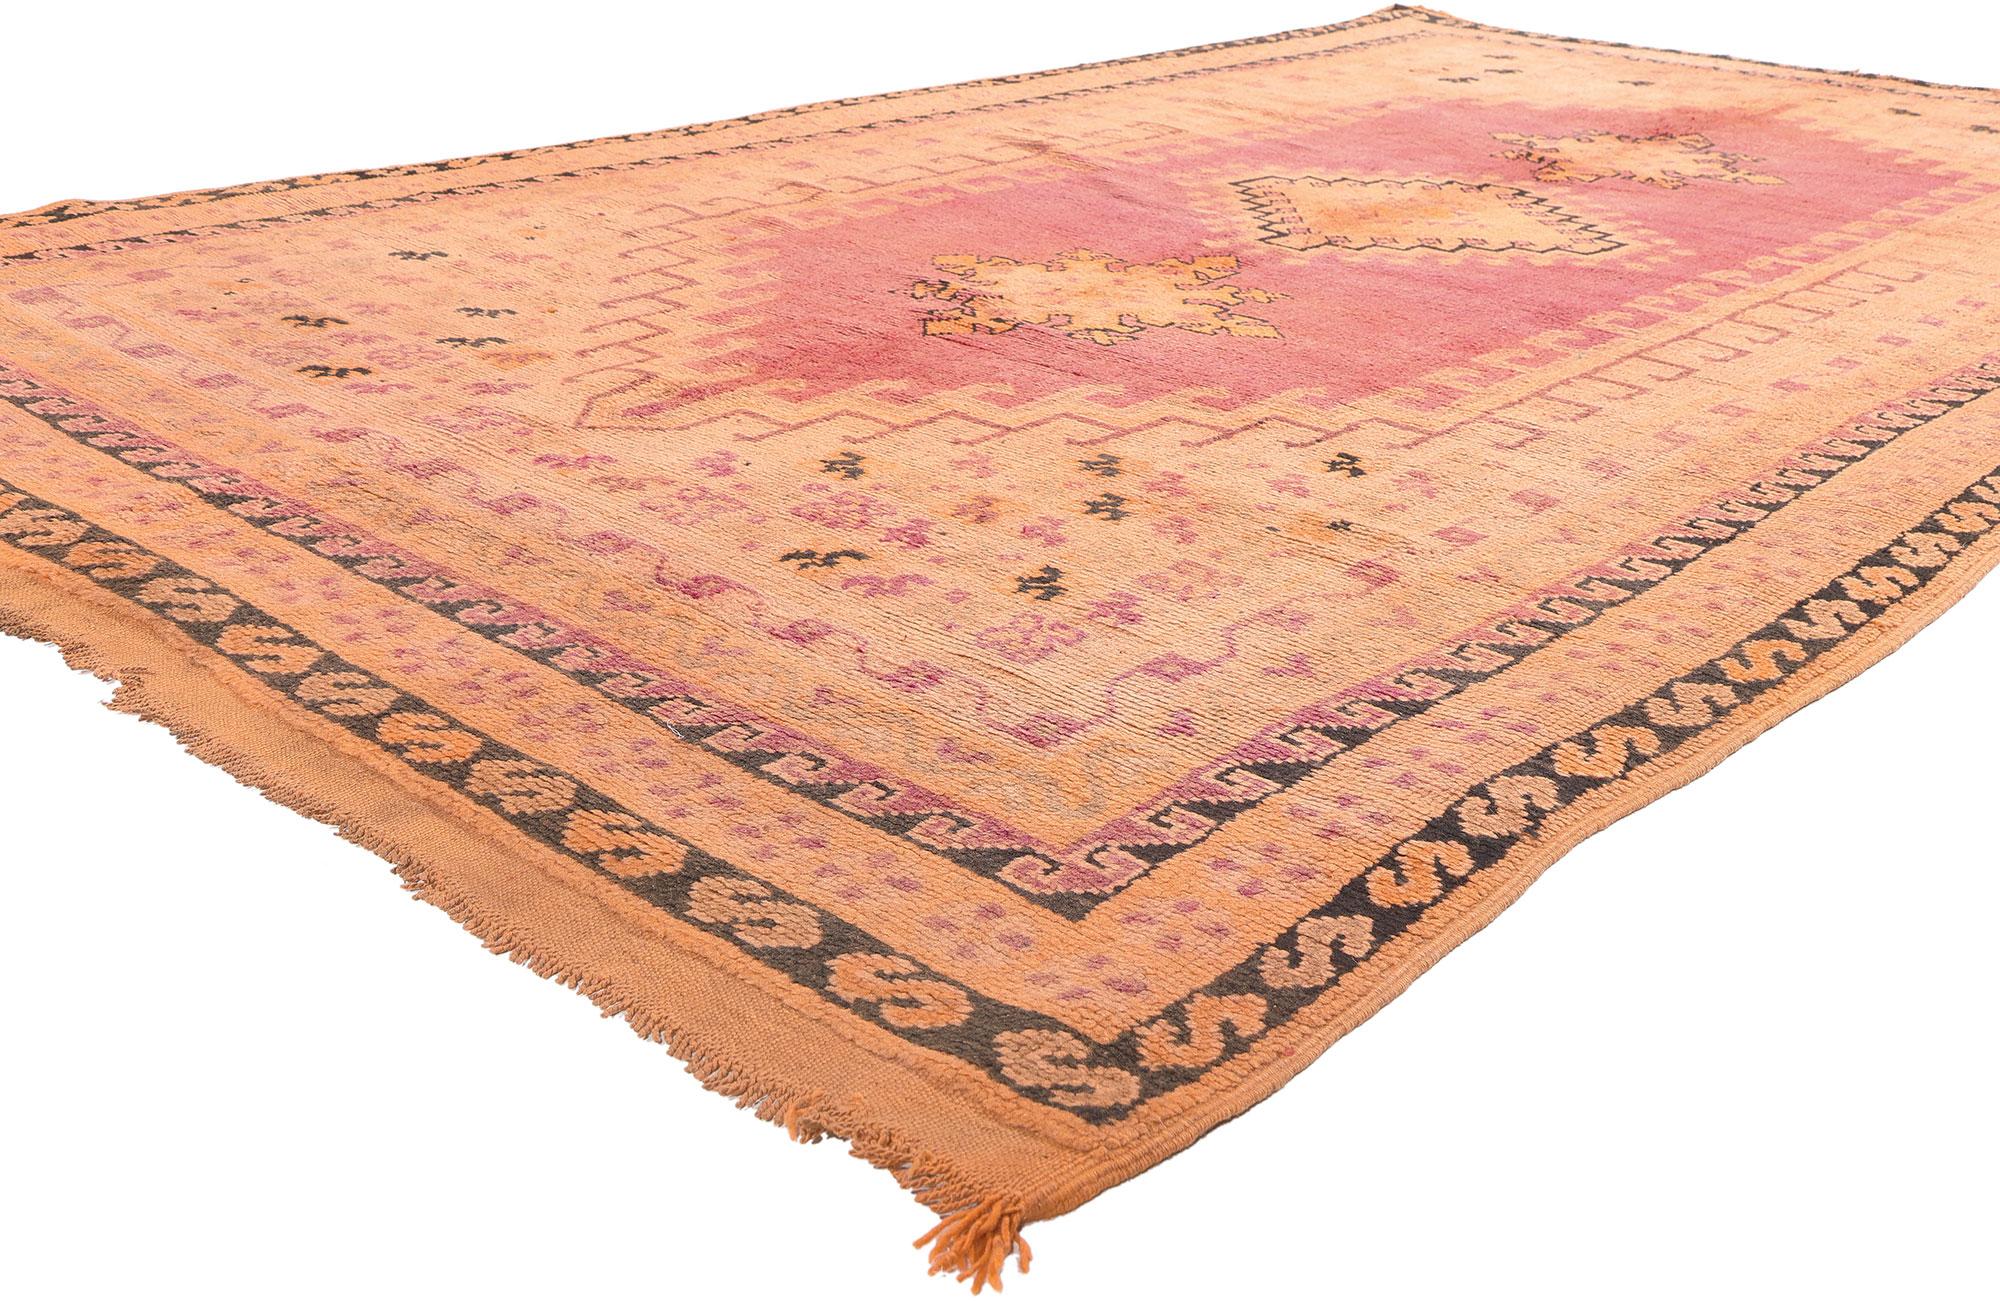 20186 Vintage Moroccan Rug, 06’03 x 11’05. 

Skillfully crafted by the Taznakht Tribe in the High Atlas Mountains of southern Morocco, this hand-knotted wool vintage Berber Moroccan rug is a captivating embodiment of woven beauty. Rooted in the rich